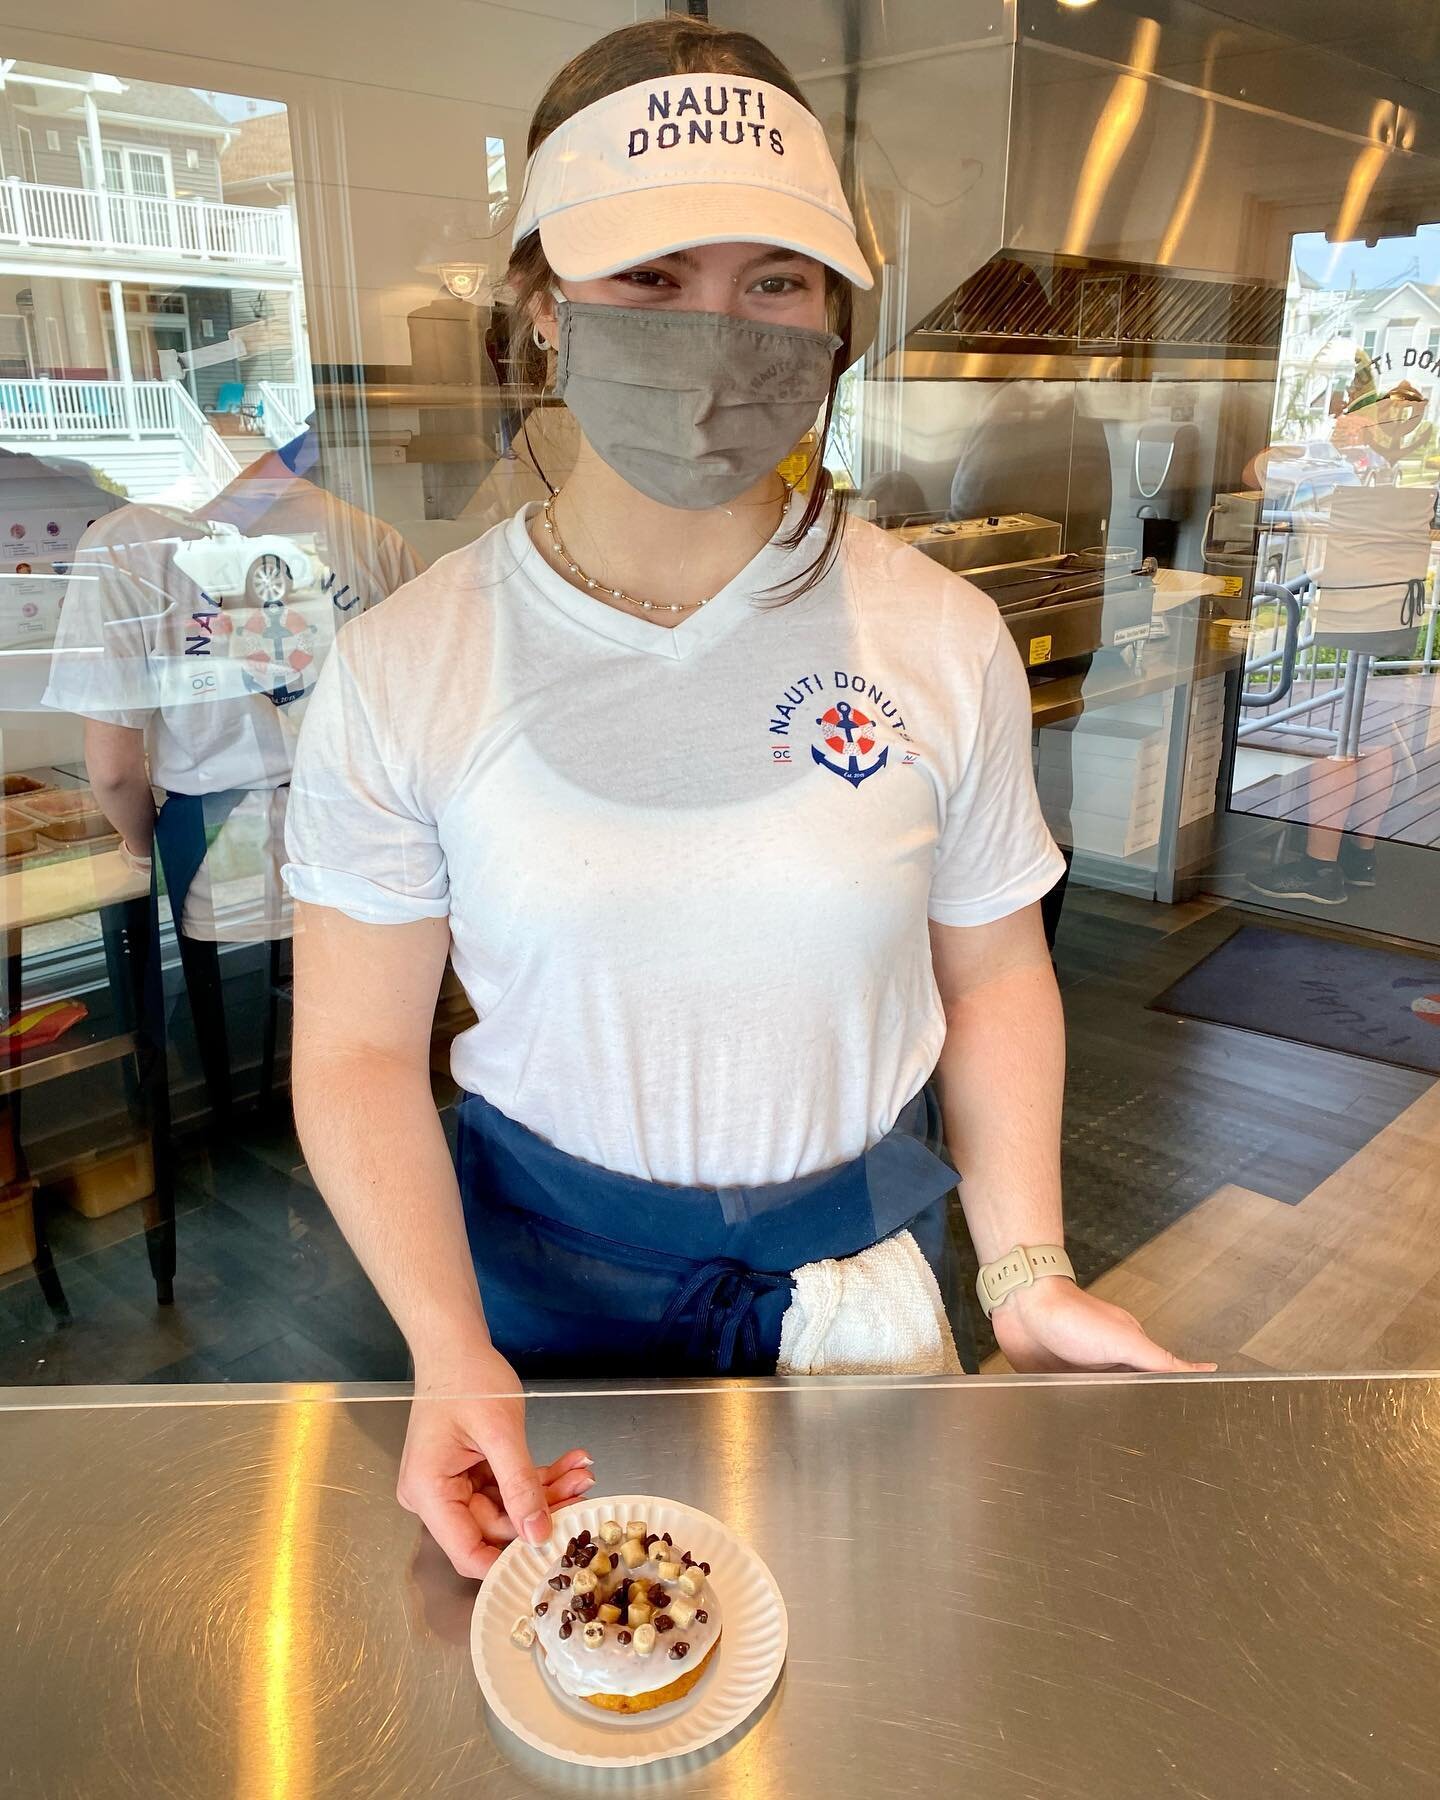 Happy Mother&rsquo;s Day!! Moms are the absolute best, so to celebrate we have a special donut! Stop in and grab mom a donut and latte while she relaxes in her pajamas!

Mother&rsquo;s Day Donut: Vanilla icing, chocolate chip cookie dough bites and c